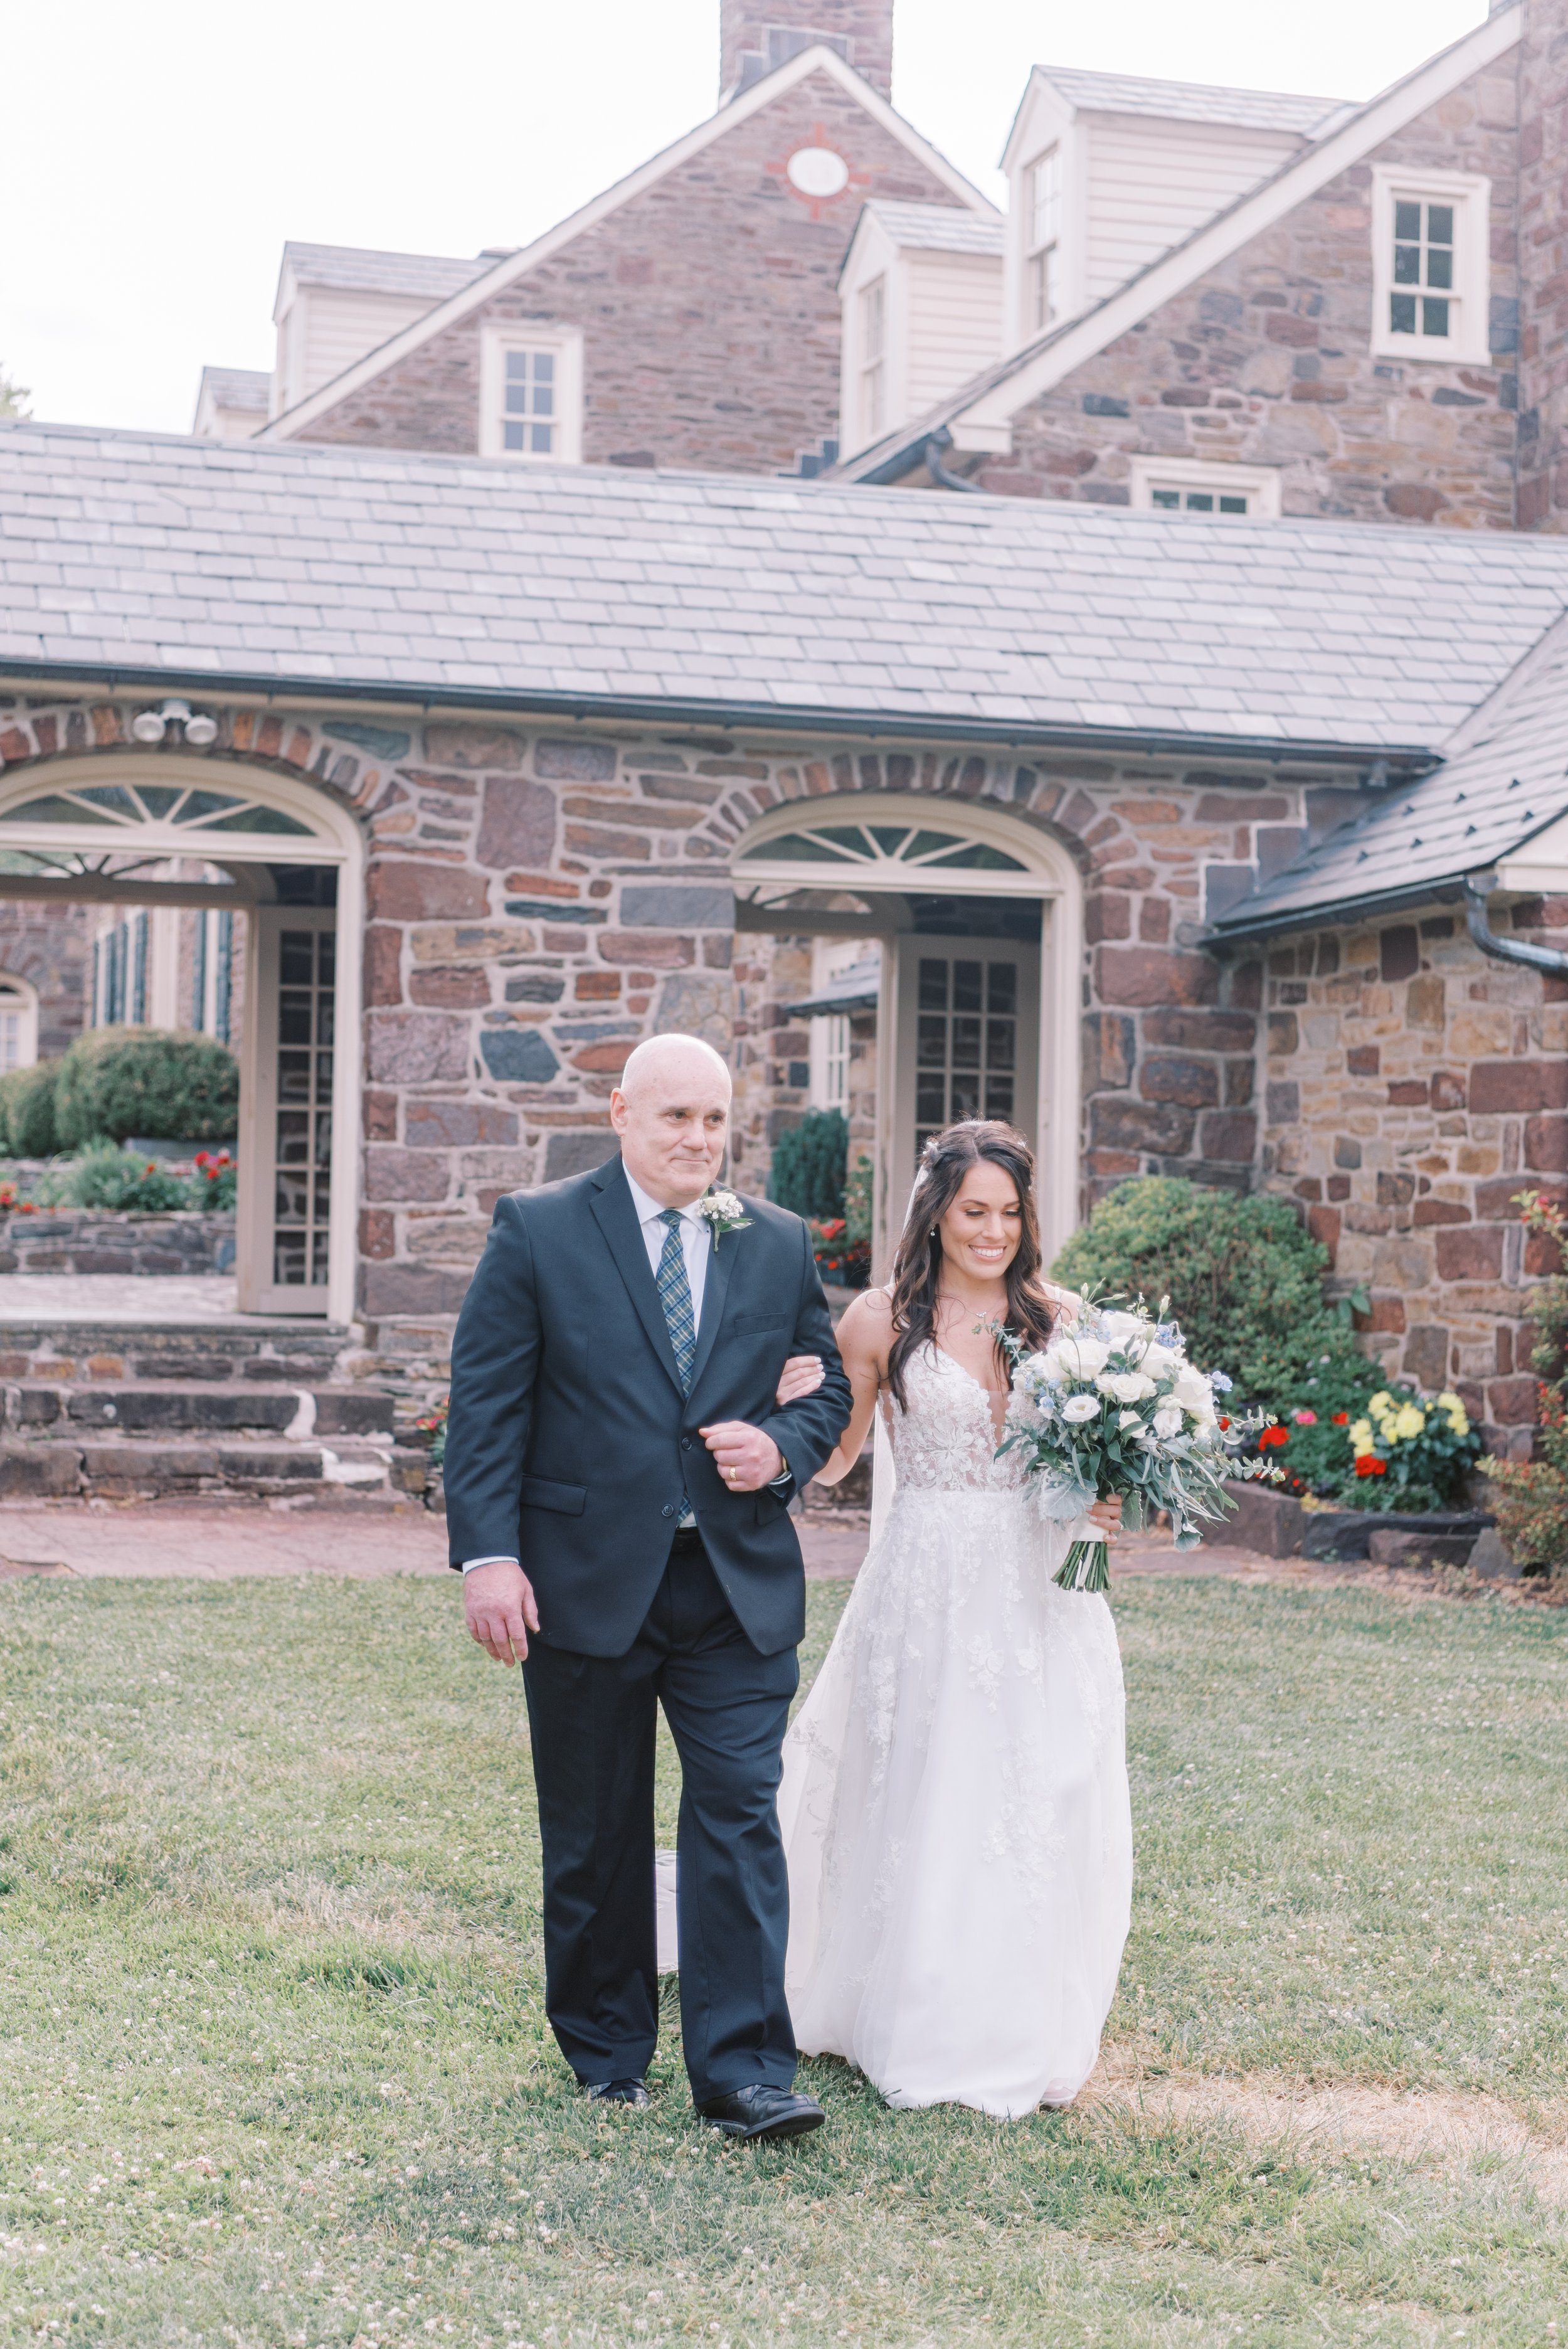 Jessica and Colby's Wedding at Pearl S Buck Estate